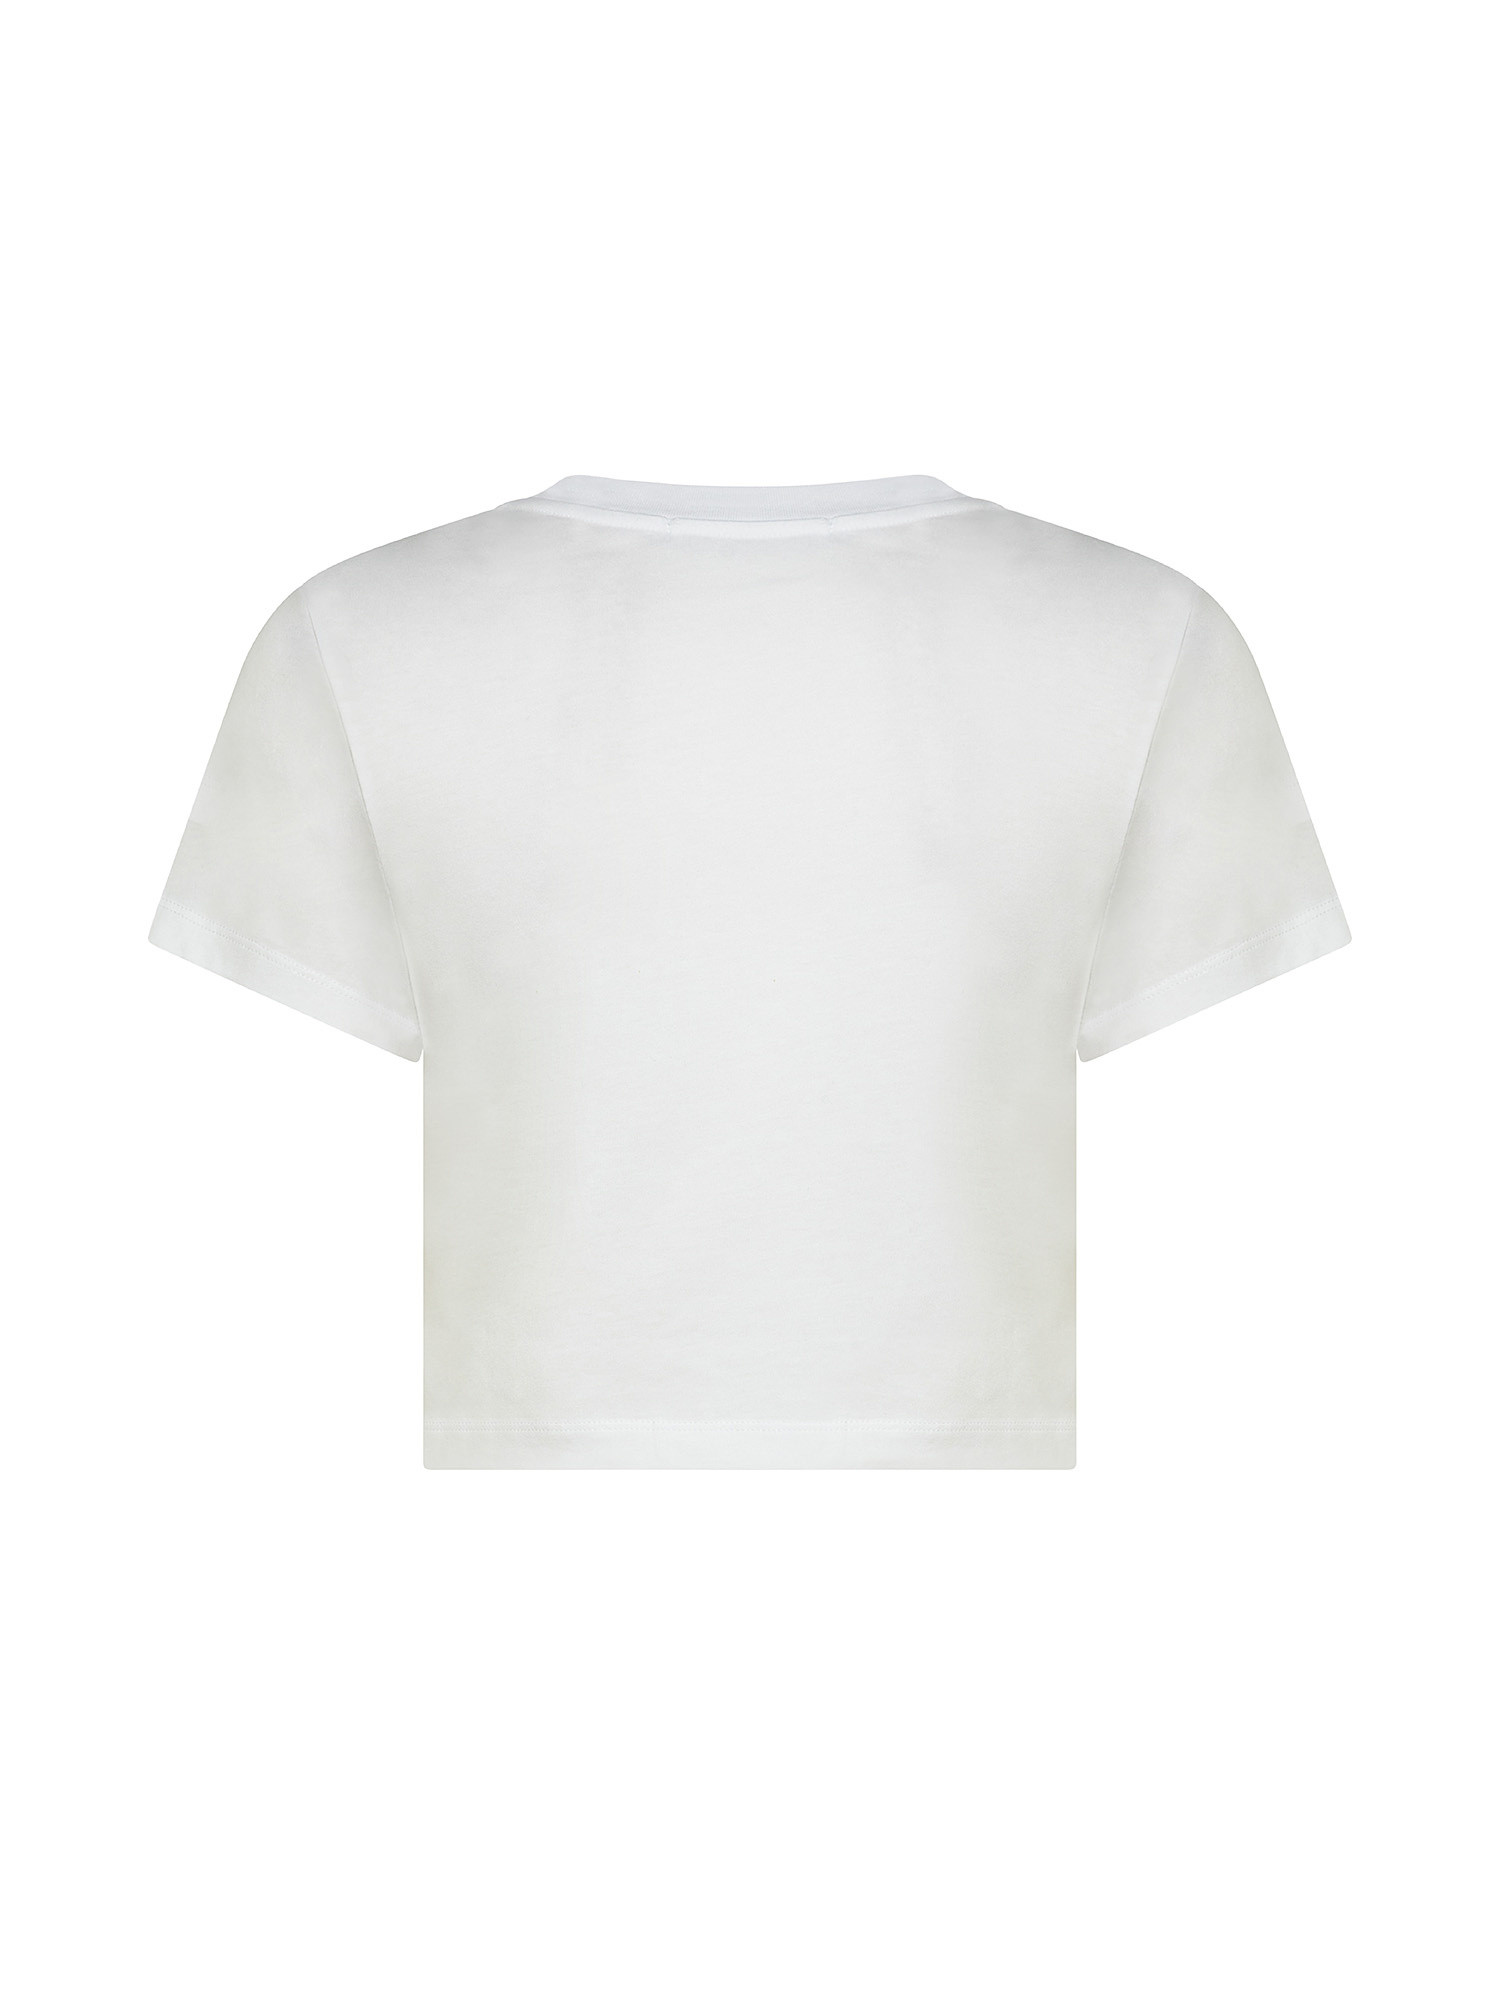 Crop-top with logo, White, large image number 1